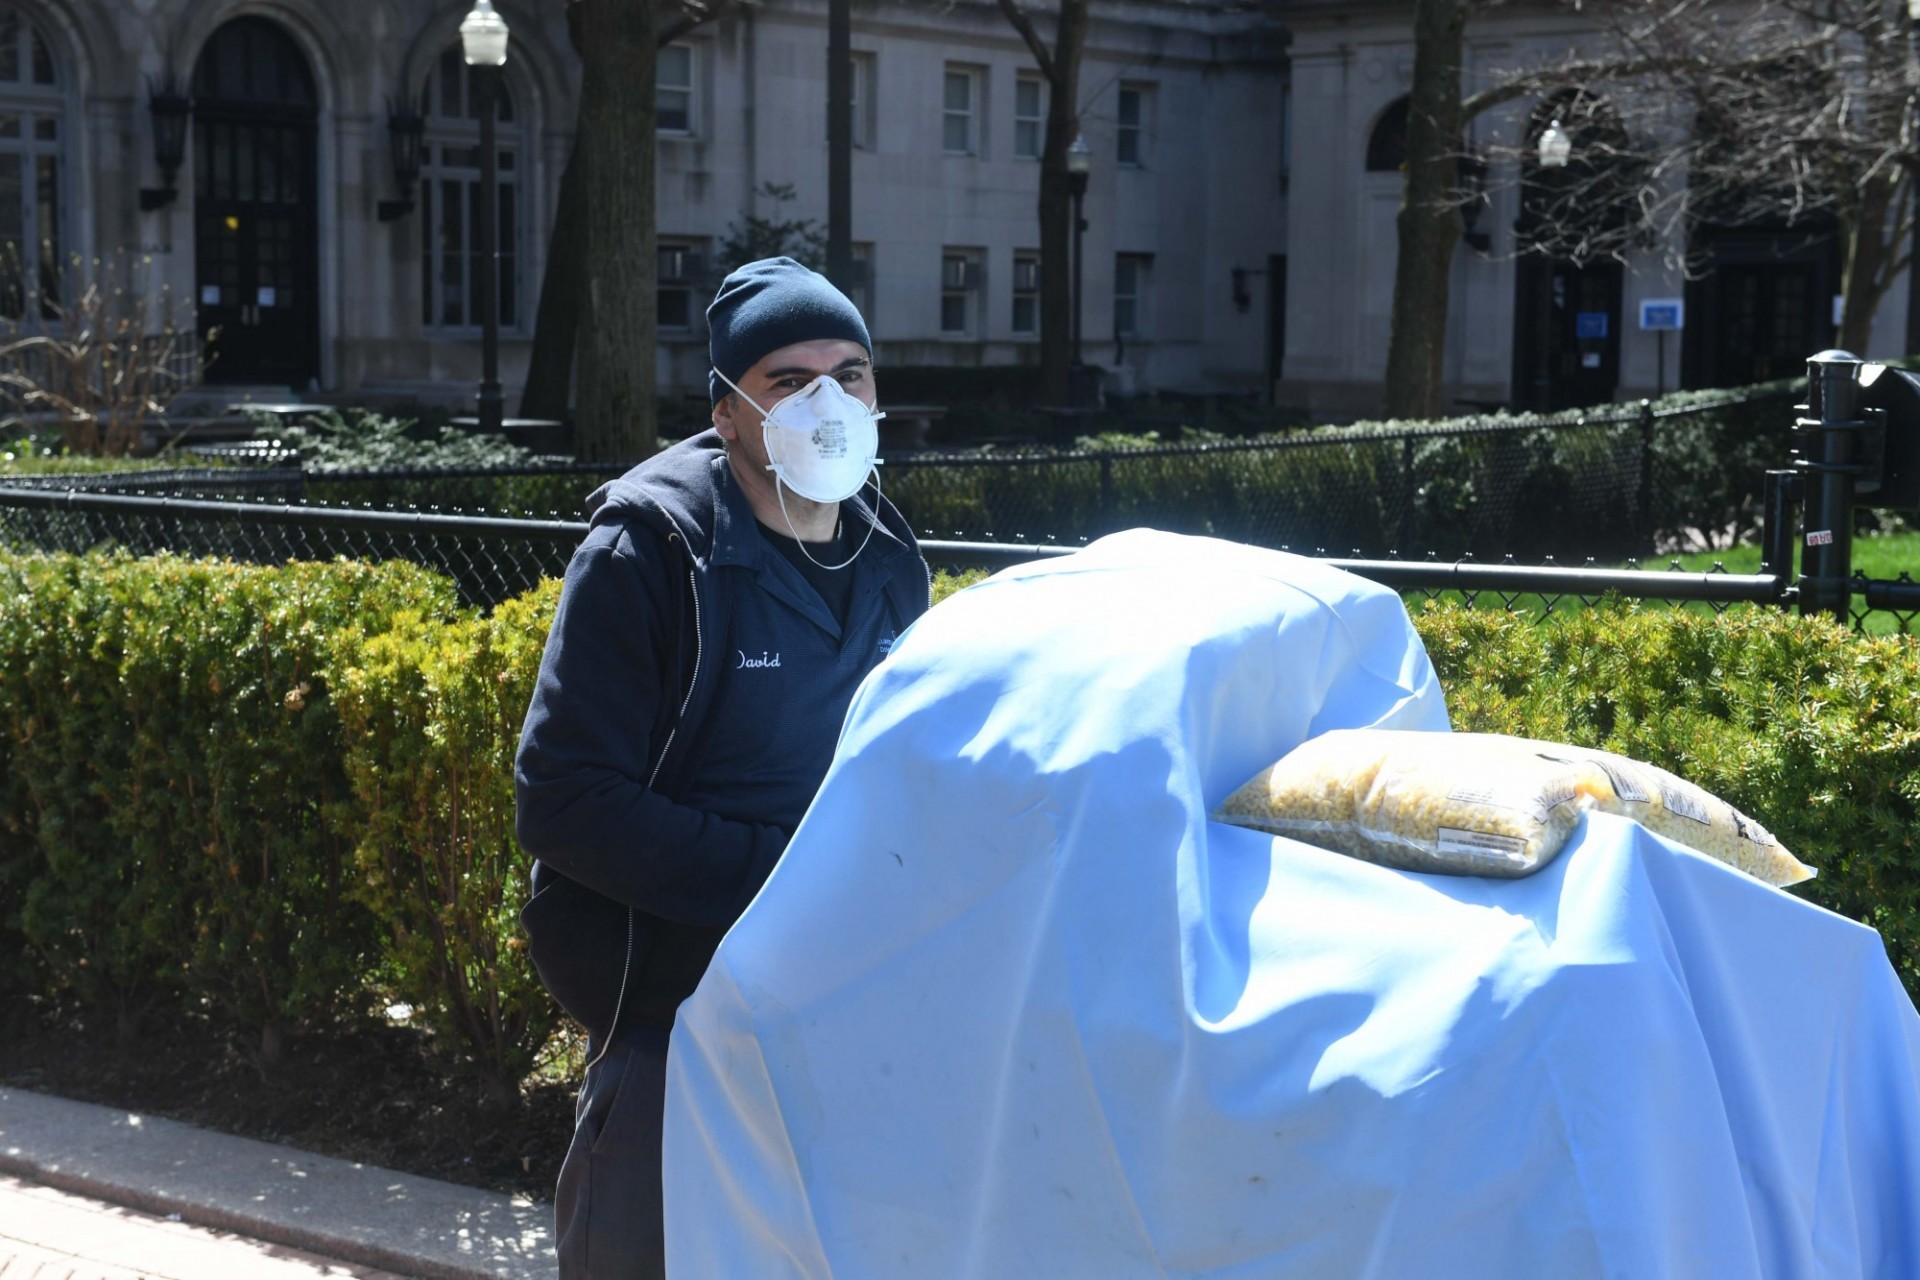 A man in a blue custodial uniform wearing a knit hat, jacket, and mask pushes a covered cart across campus.